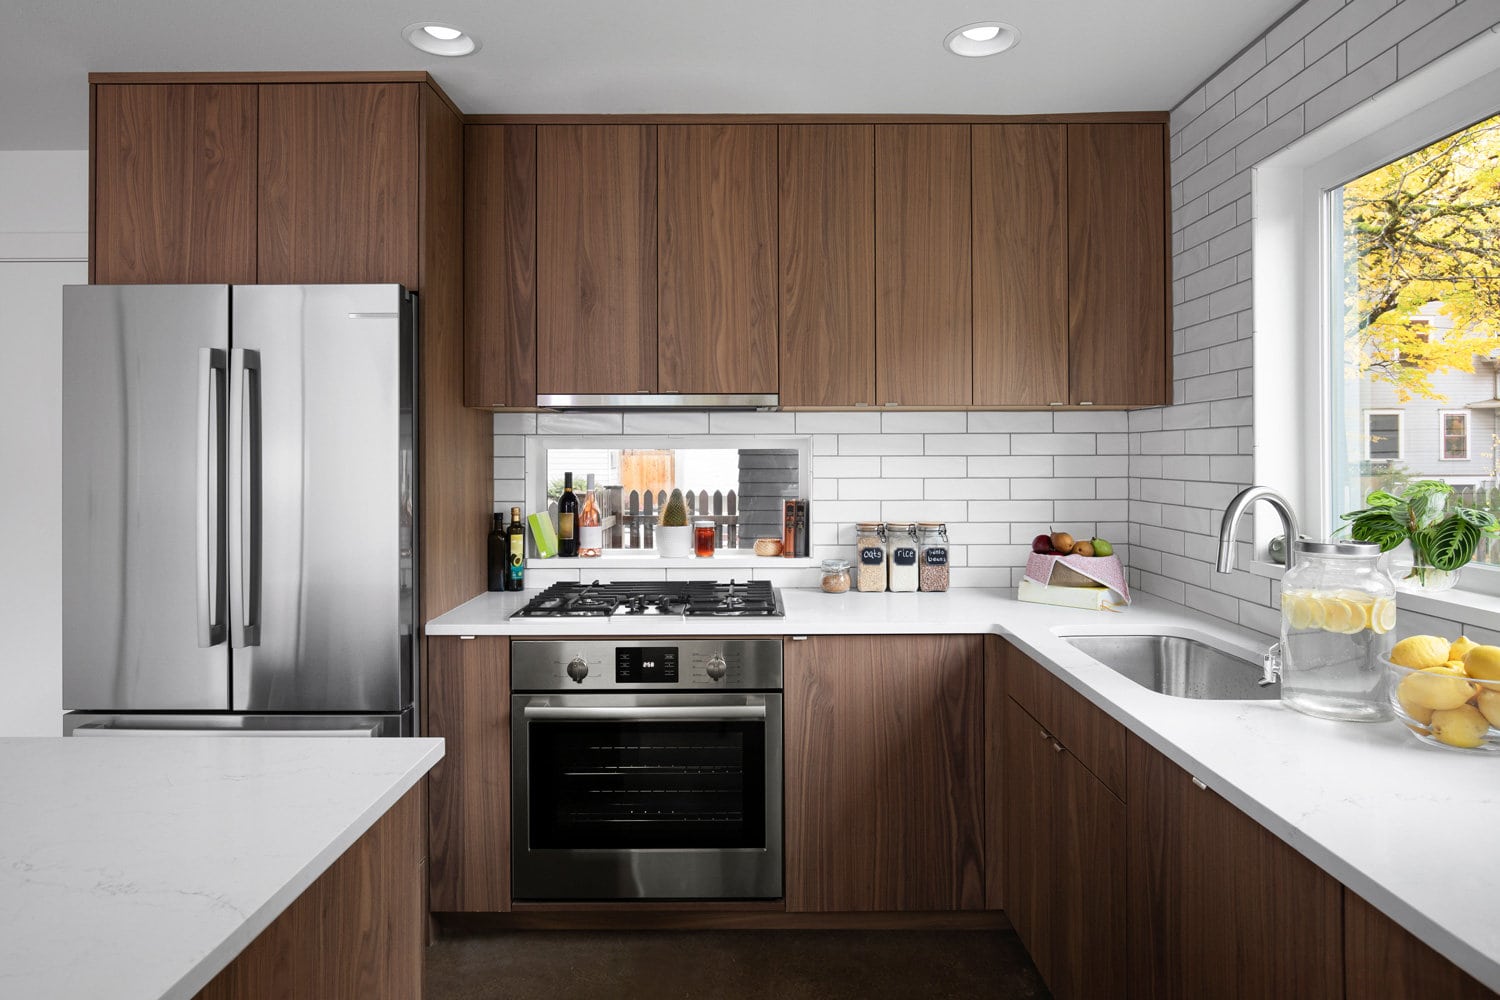 New designed modern kitchen fully styled with stainless steel appliances.